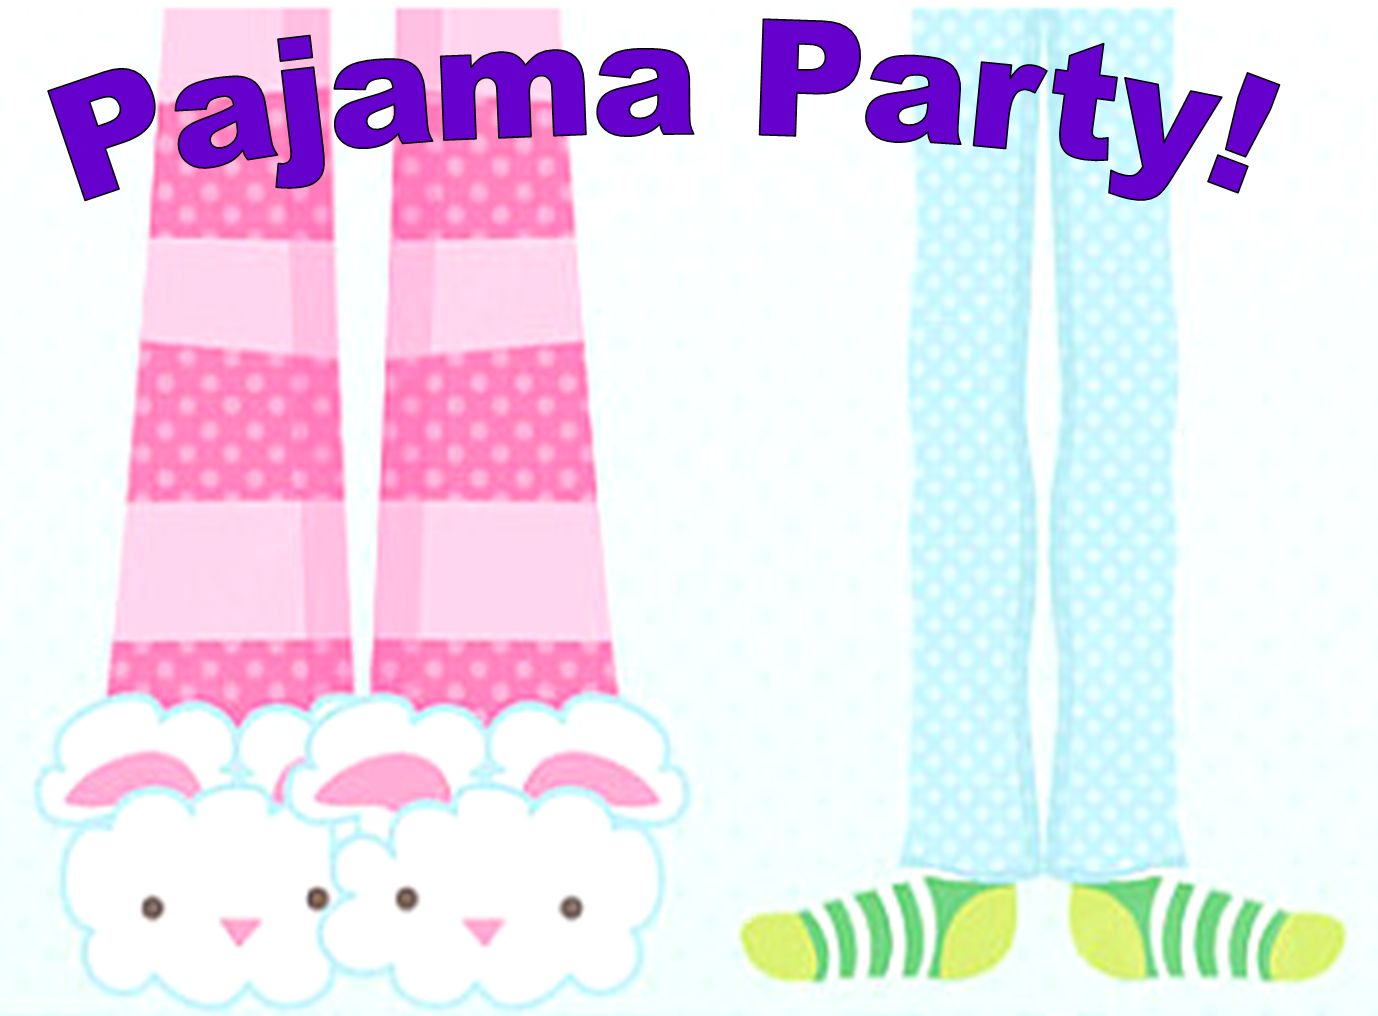 Must Bring Your own Pajamas!